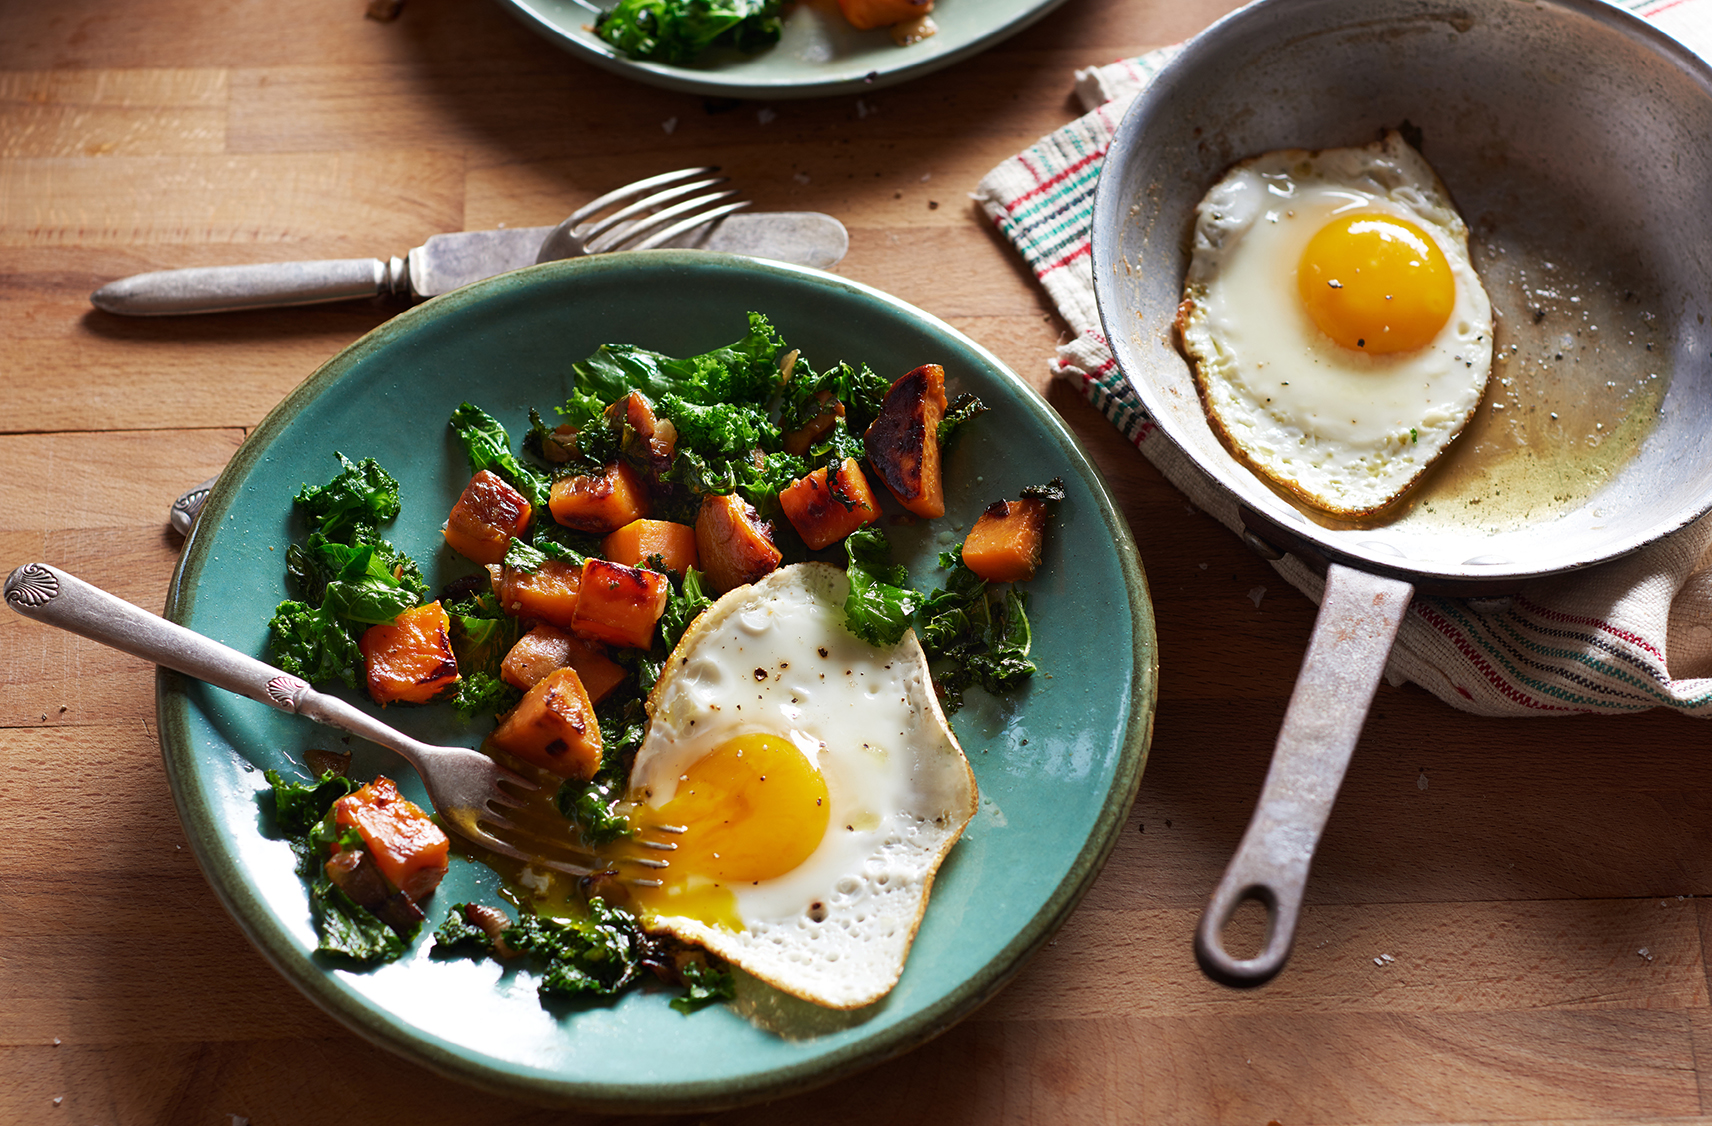 Caramelized sweet potato and wilted kale with a perfect sunny side up egg